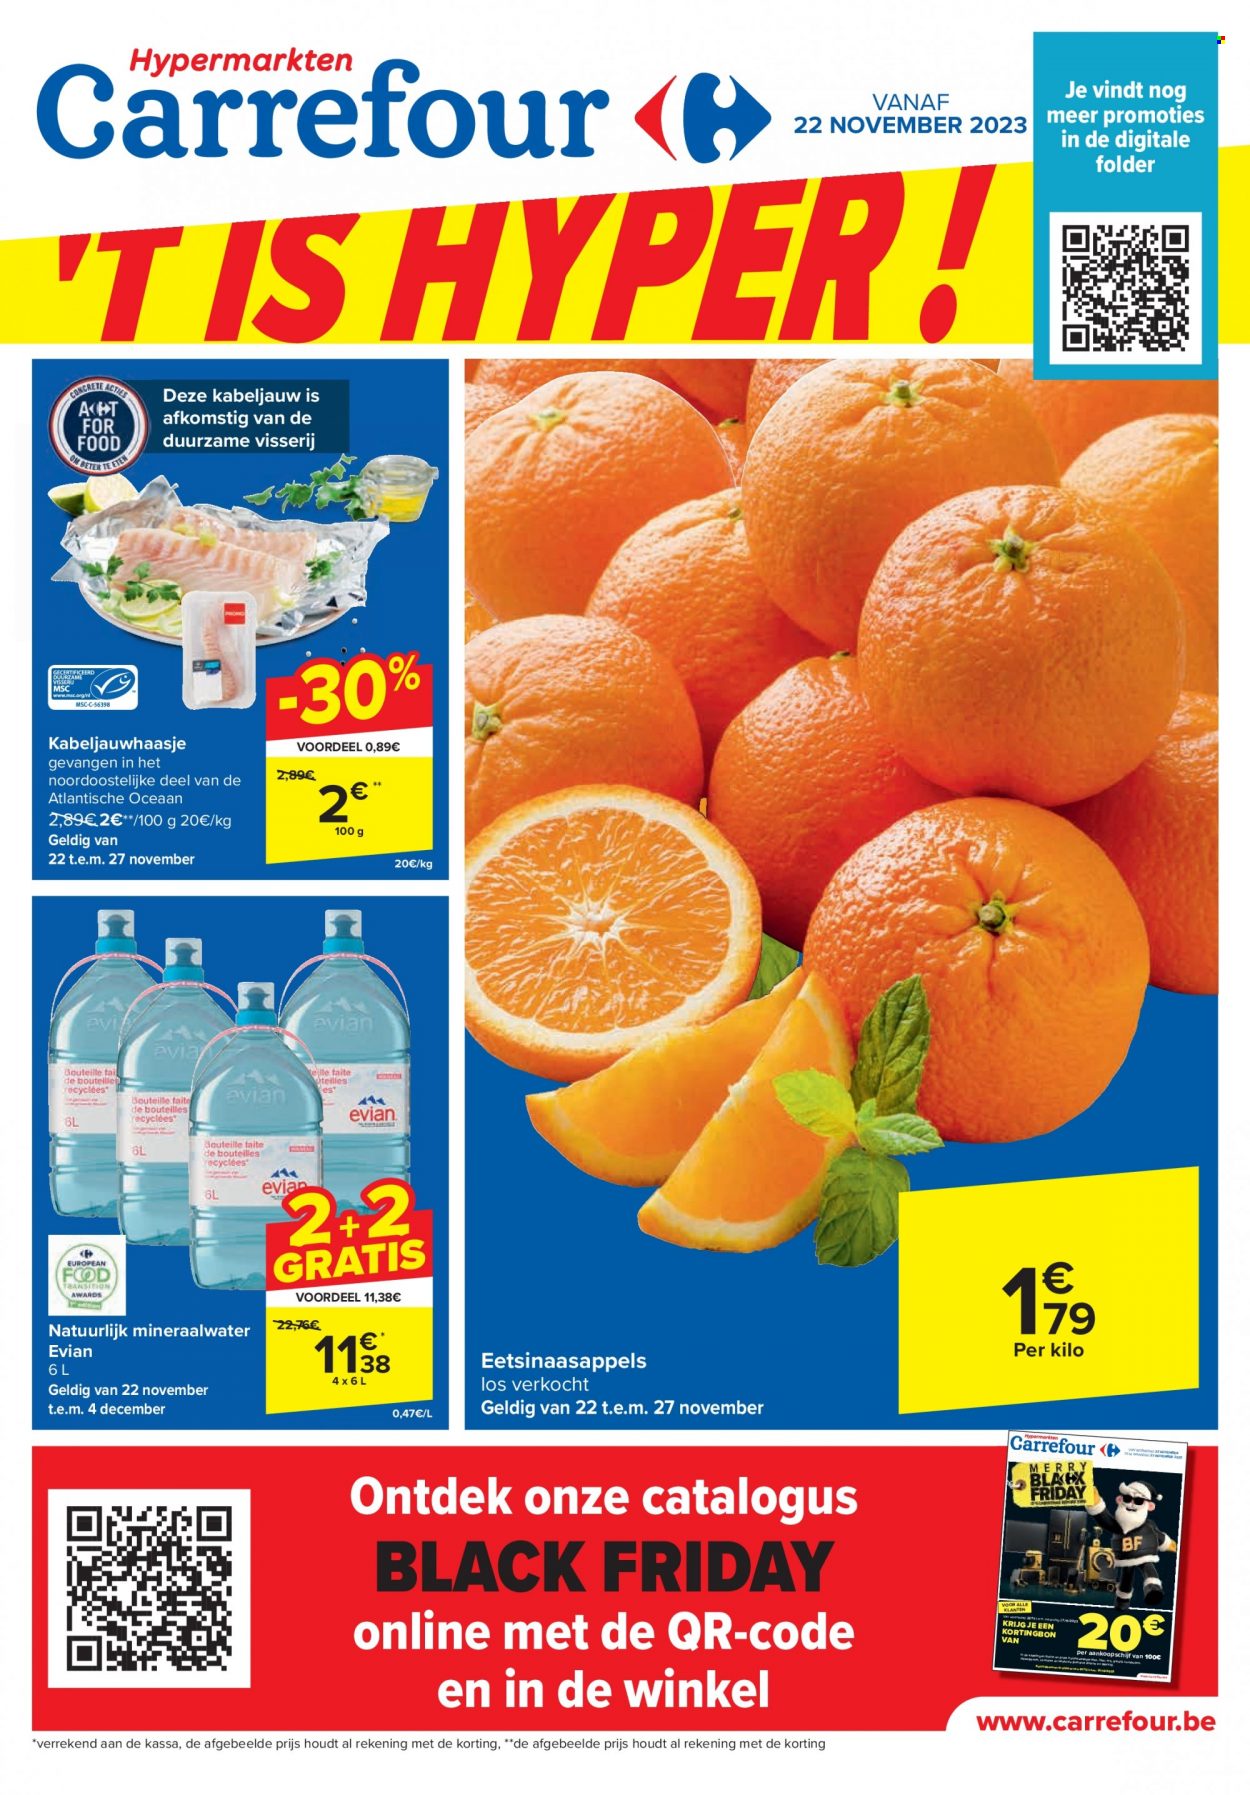 Catalogue Carrefour hypermarkt - 22.11.2023 - 4.12.2023. Page 1.